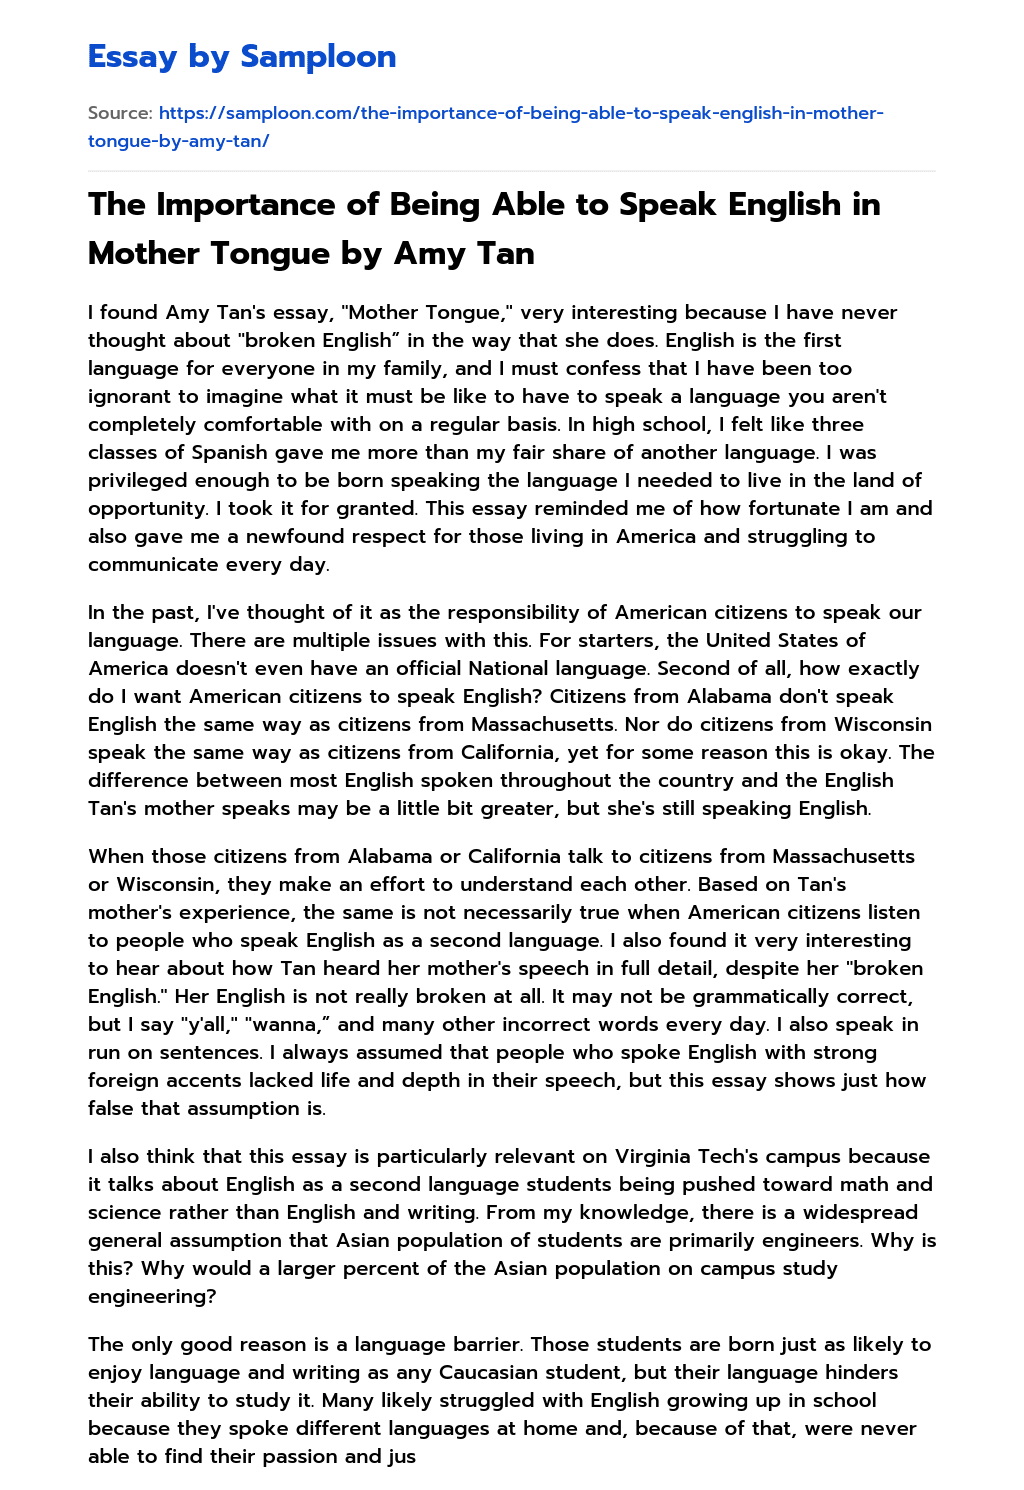 The Importance of Being Able to Speak English in Mother Tongue by Amy Tan essay